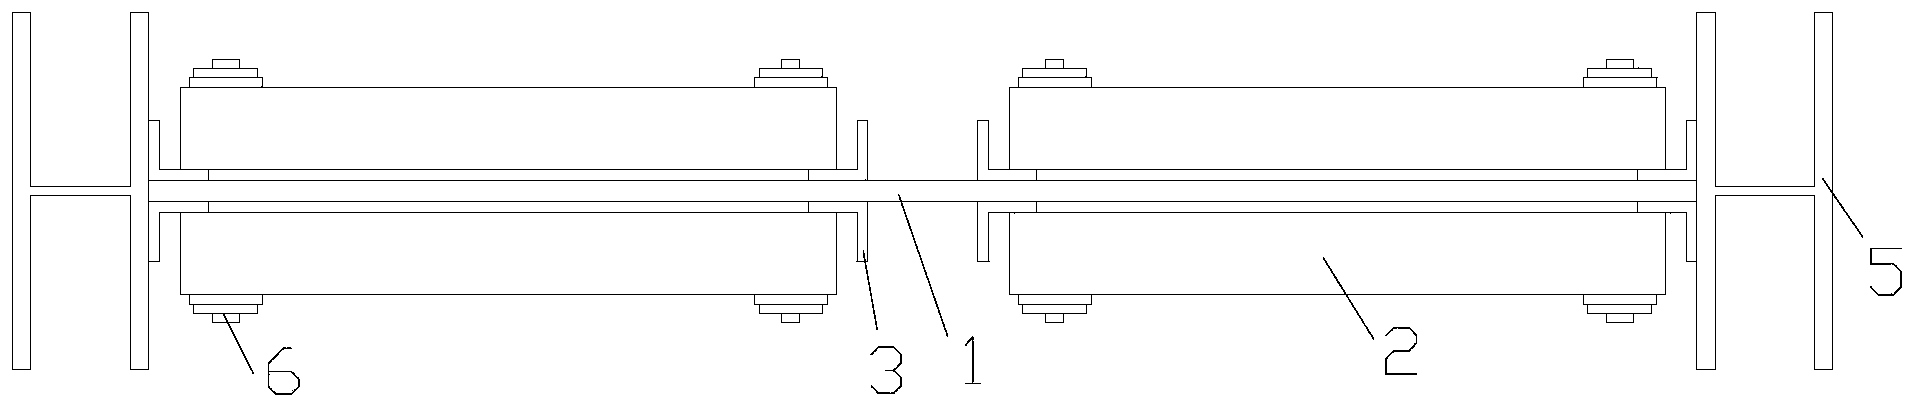 Buckling restrained steel plate shear wall with out-plane deformation space